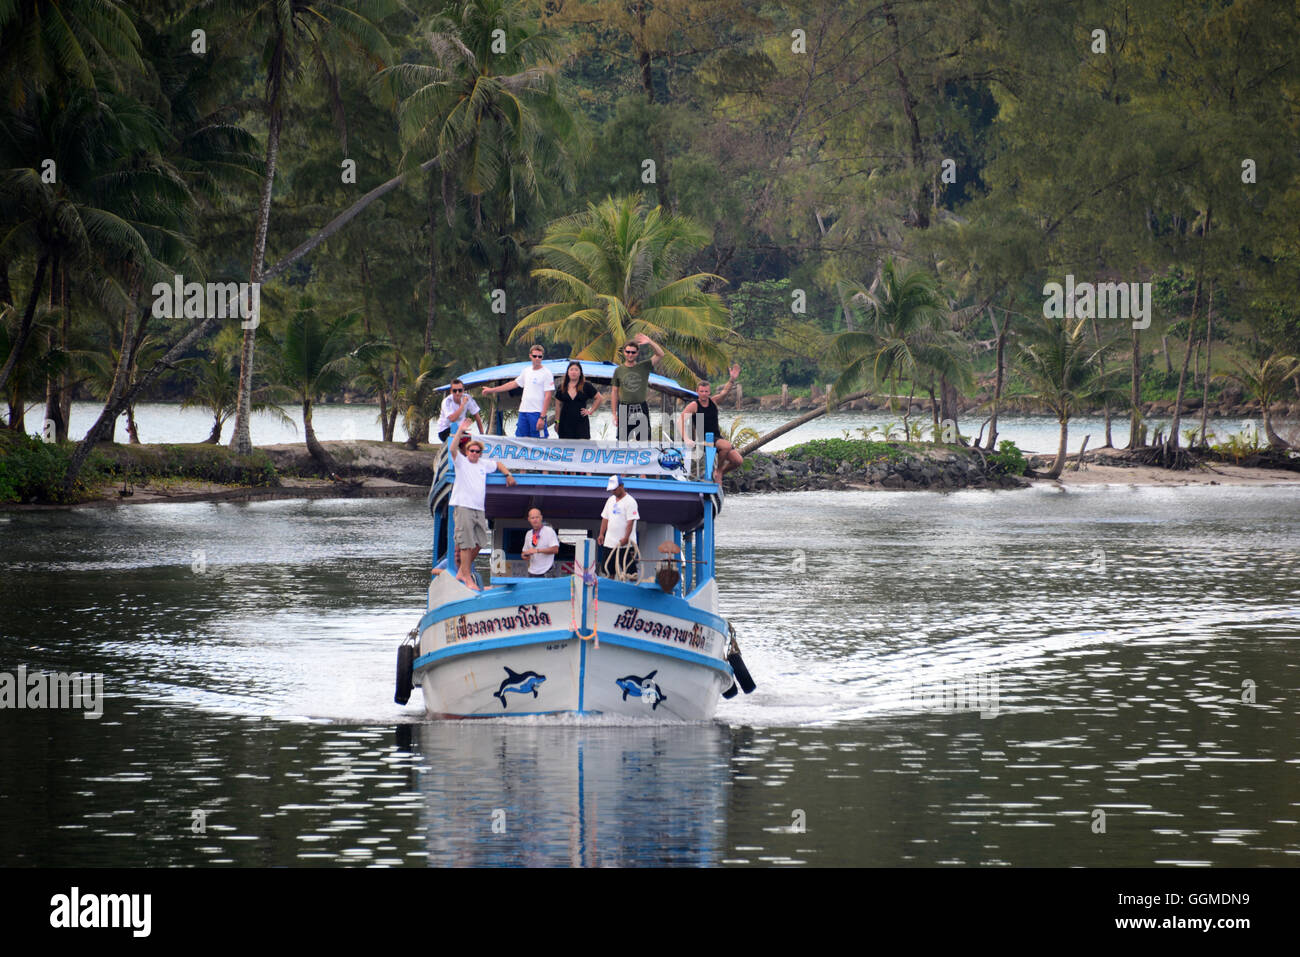 Diving boat on the island of Kut, Golf of Thailand, Thailand Stock Photo